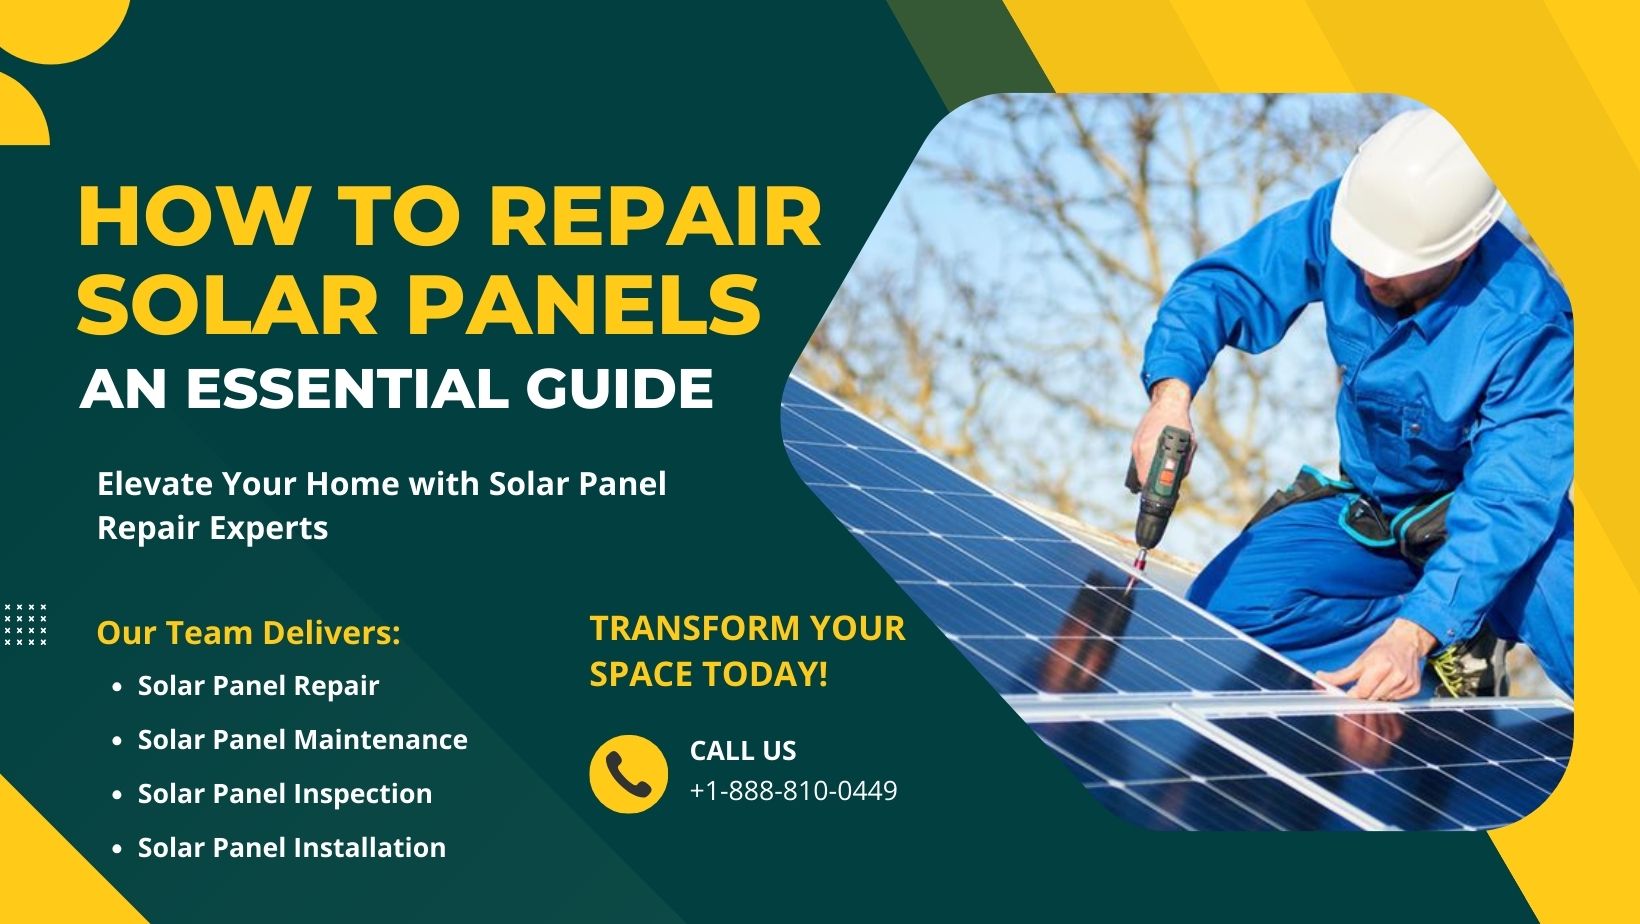 How To Repair Solar Panels: An Essential Guide